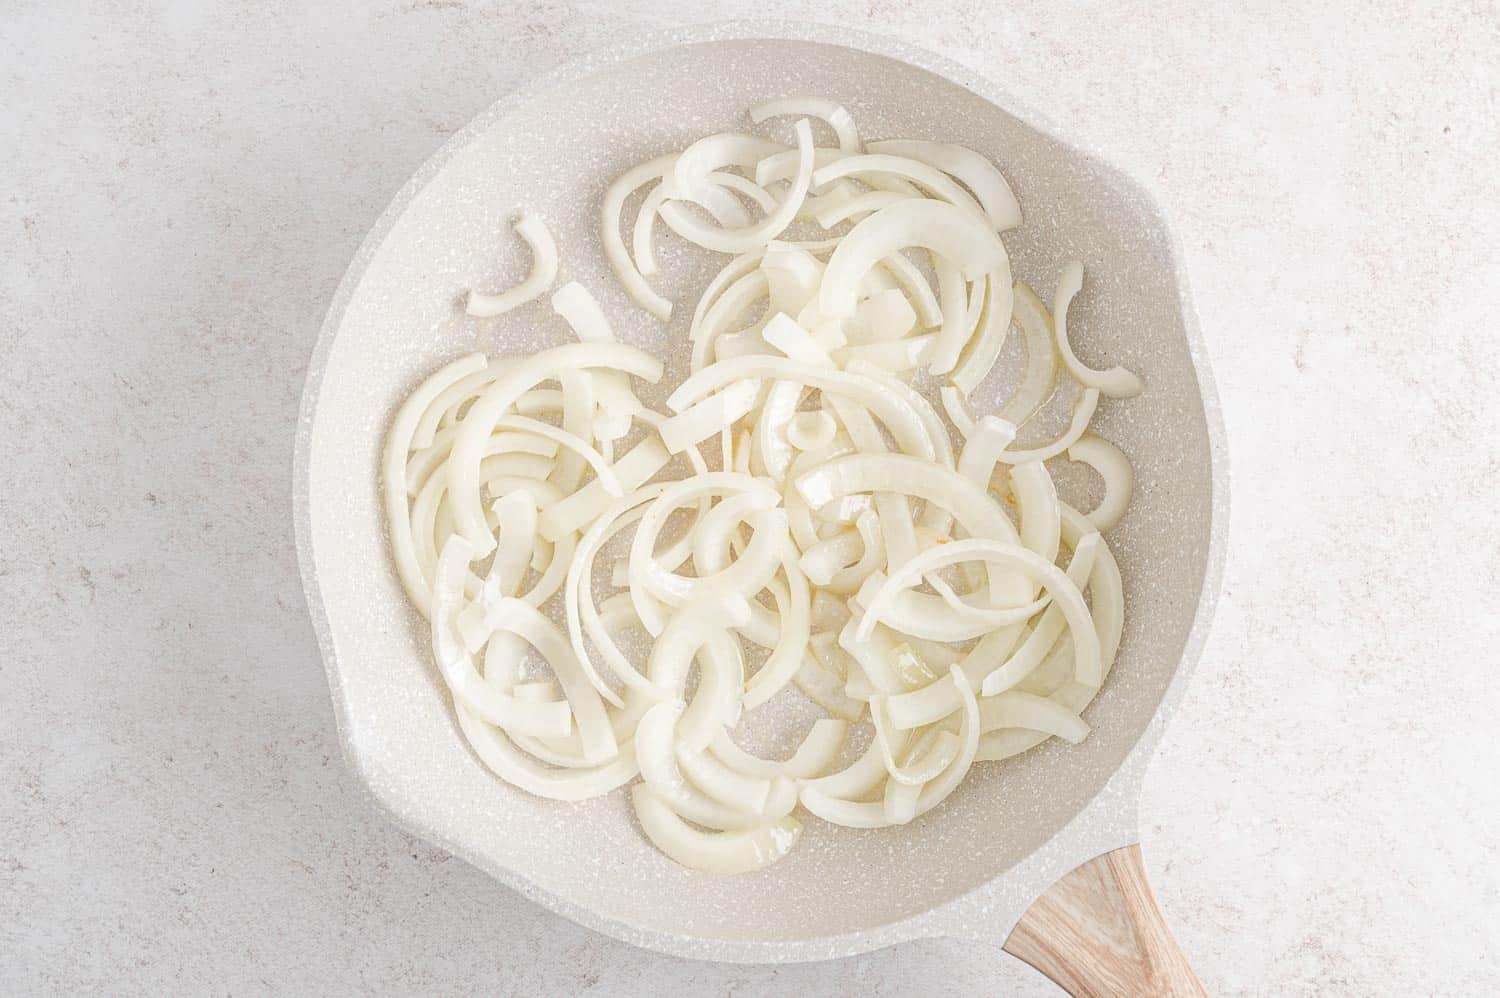 Uncooked onion in a frying pan.